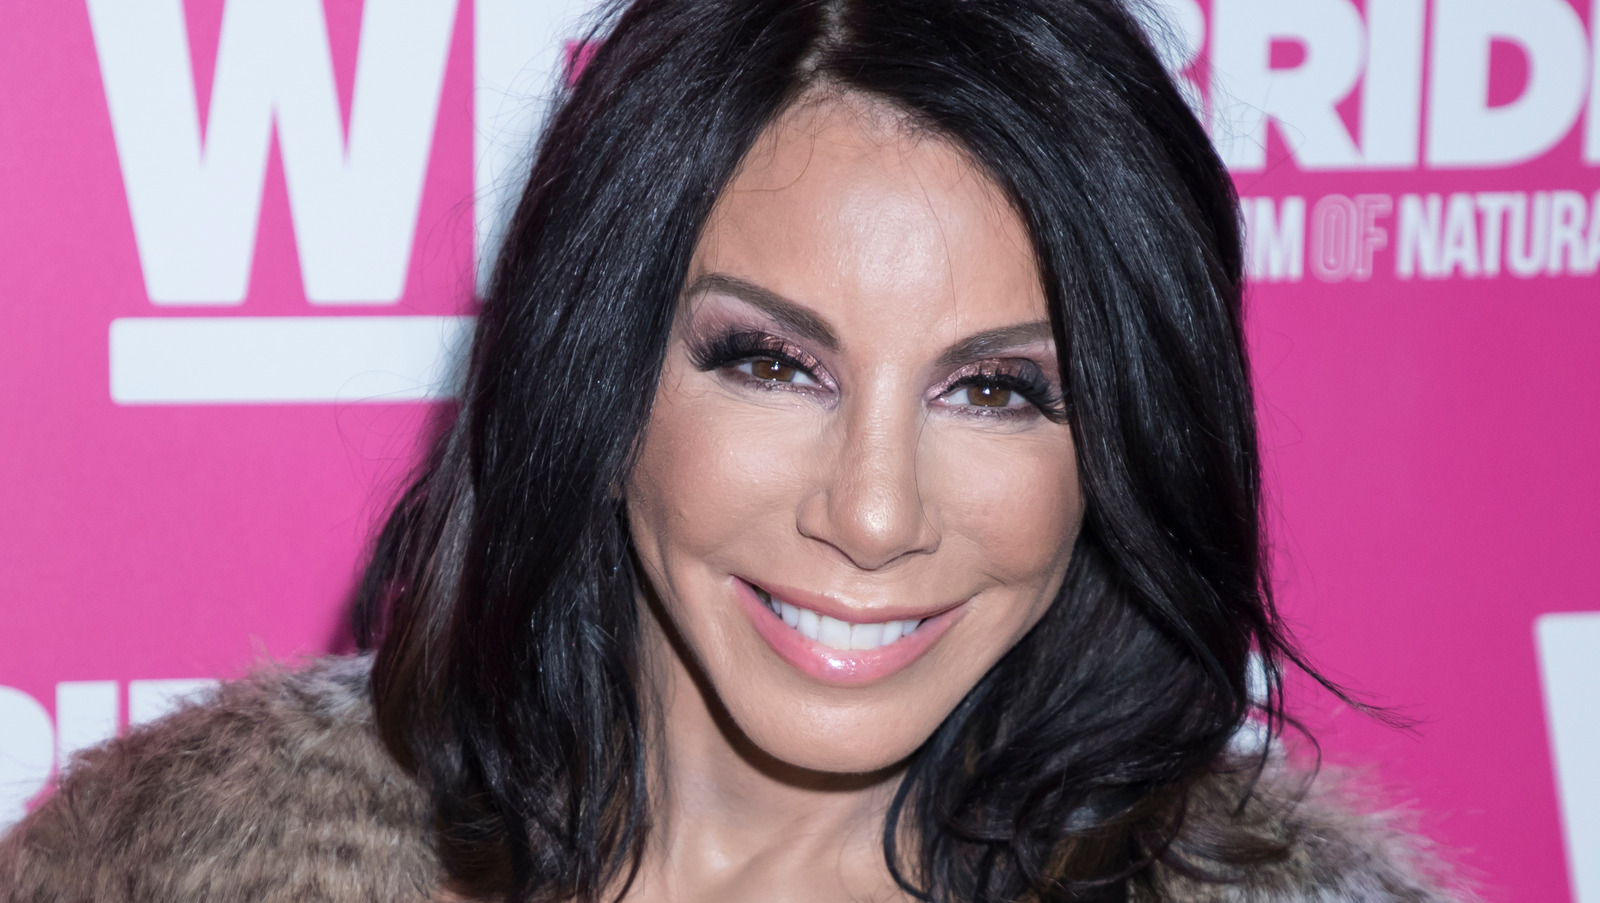 RHONJ: Where Do Danielle Staub And Andy Cohen Stand Today?